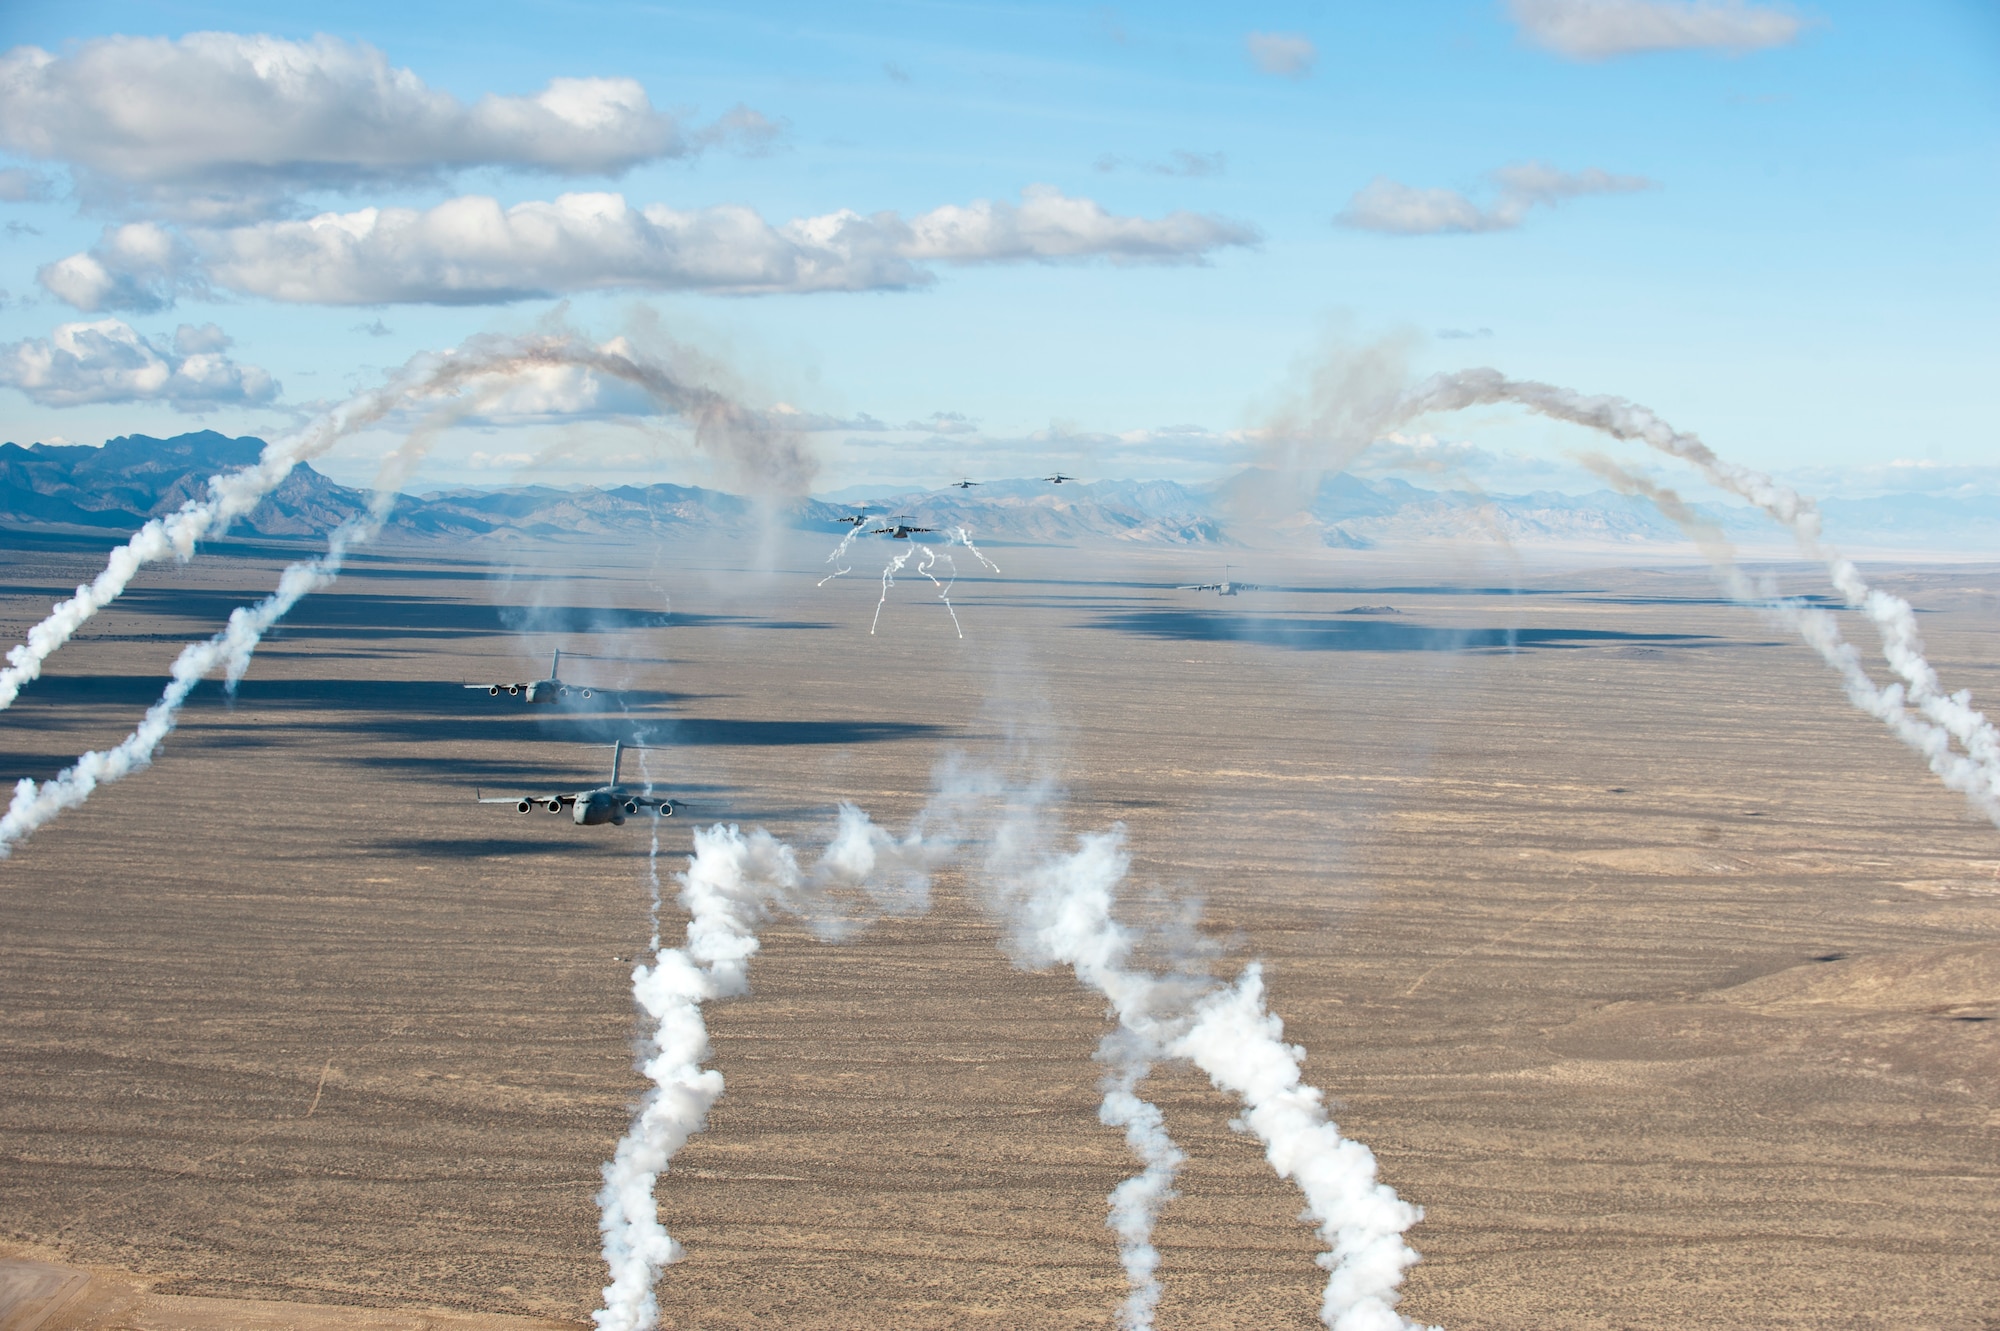 U.S. Air Force C-17 Globemaster IIIs deploy flares while flying over the Nevada Test and Training Range while participating in the U.S. Air Force Weapons School's Joint Forcible Entry Exercise 14B Dec. 6, 2014. When USAFWS students graduate as weapons officers, they will go back to their units and share that knowledge and their experiences from JFEX, to better prepare the Air Force operate in any contingency. (U.S. Air Force photo by Senior Airman Thomas Spangler)